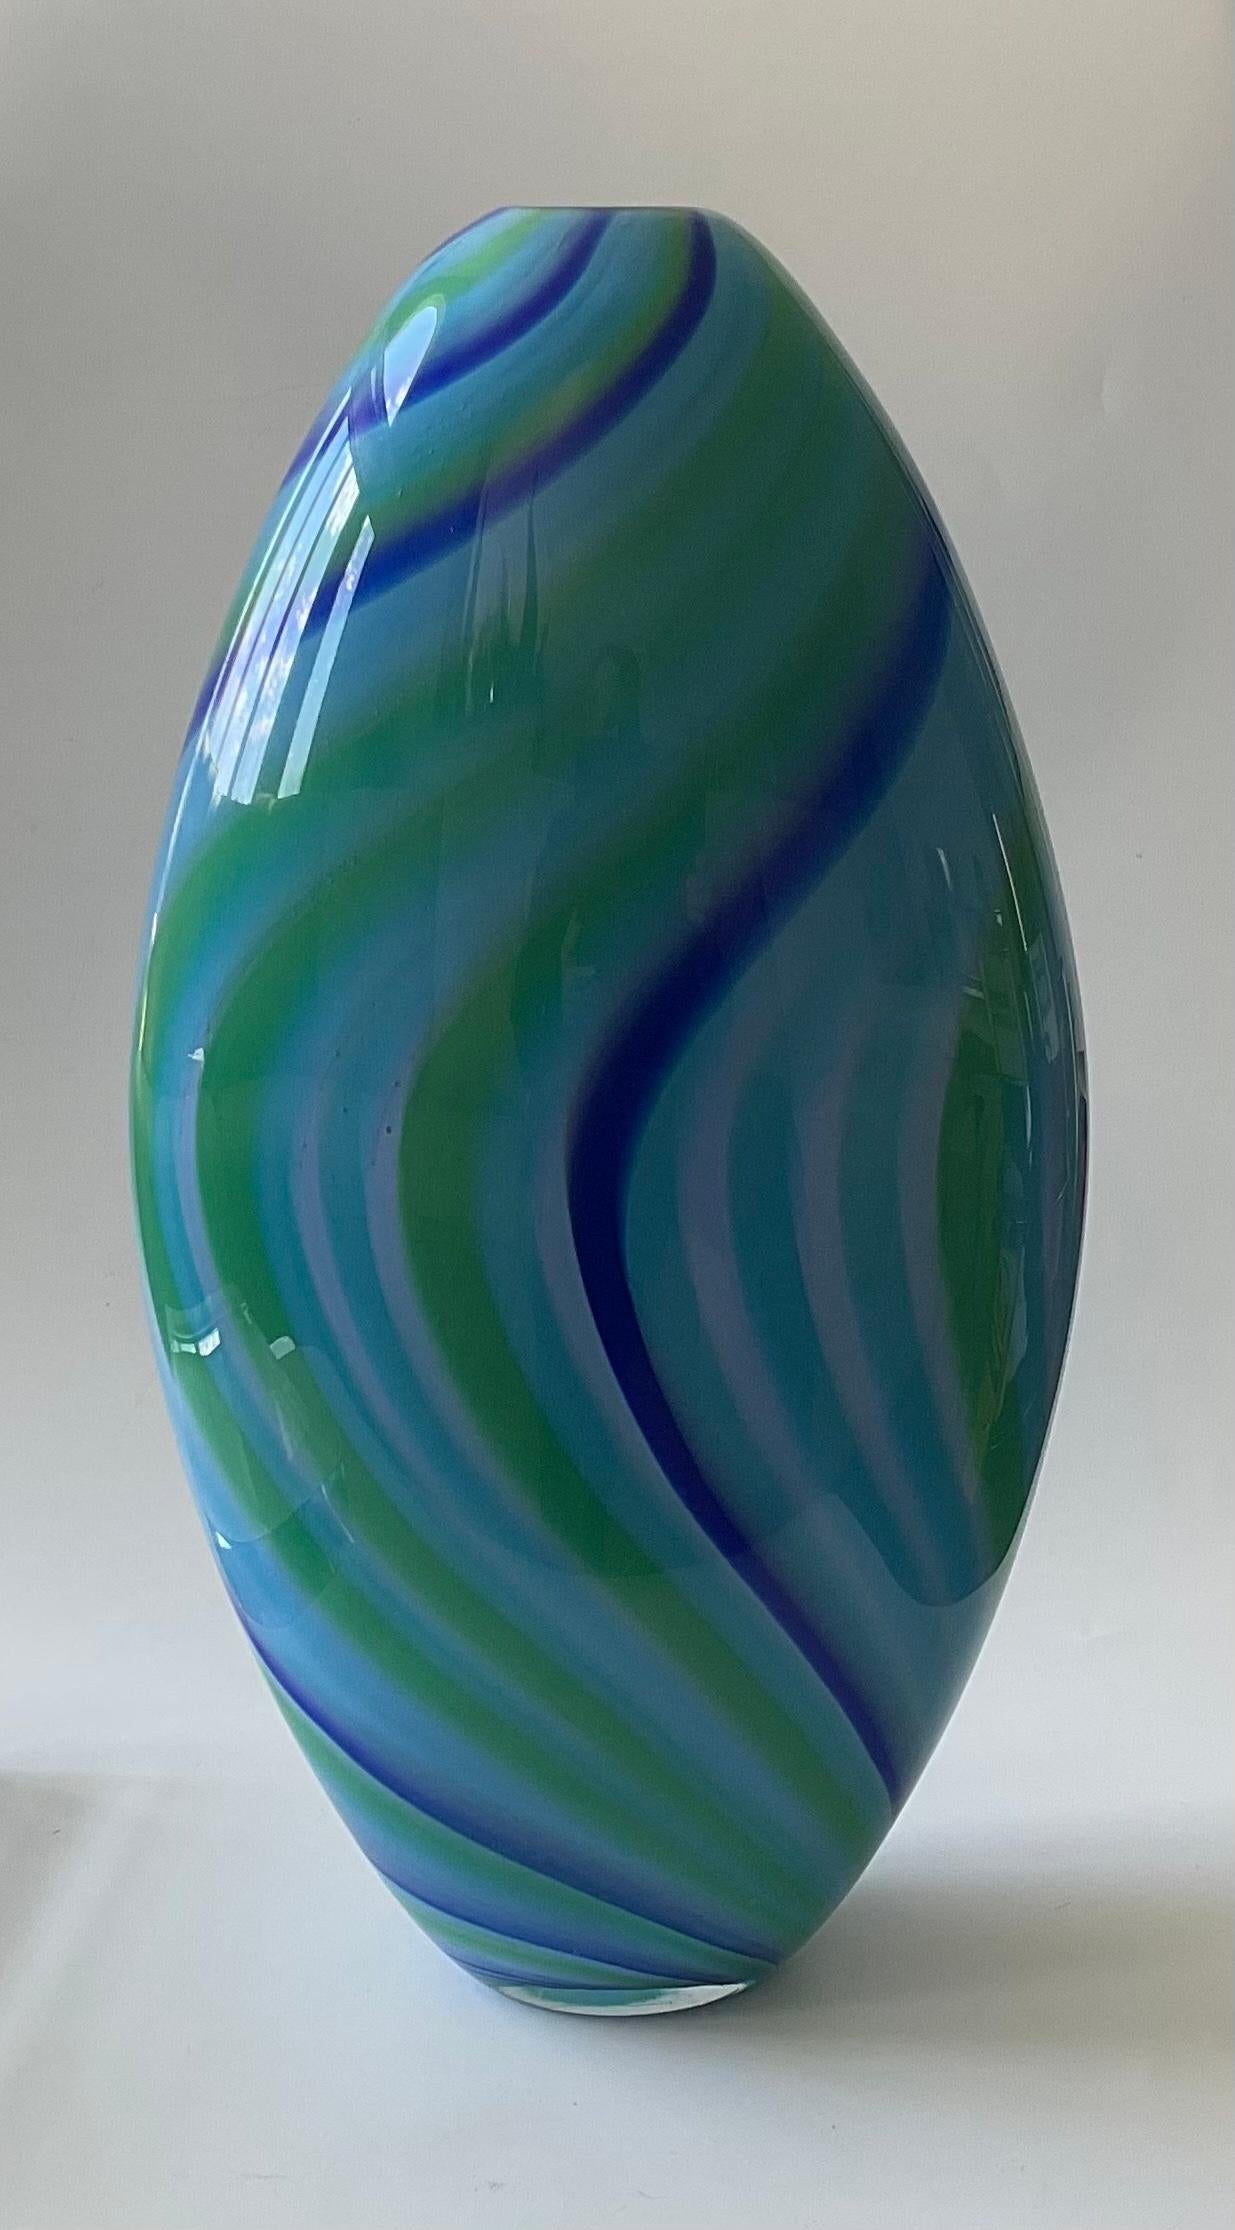 Large Seguso Viro vibrant blue Murano Glass signed and numbered Vase. Wonderful Swirling striped design in vibrant colors.